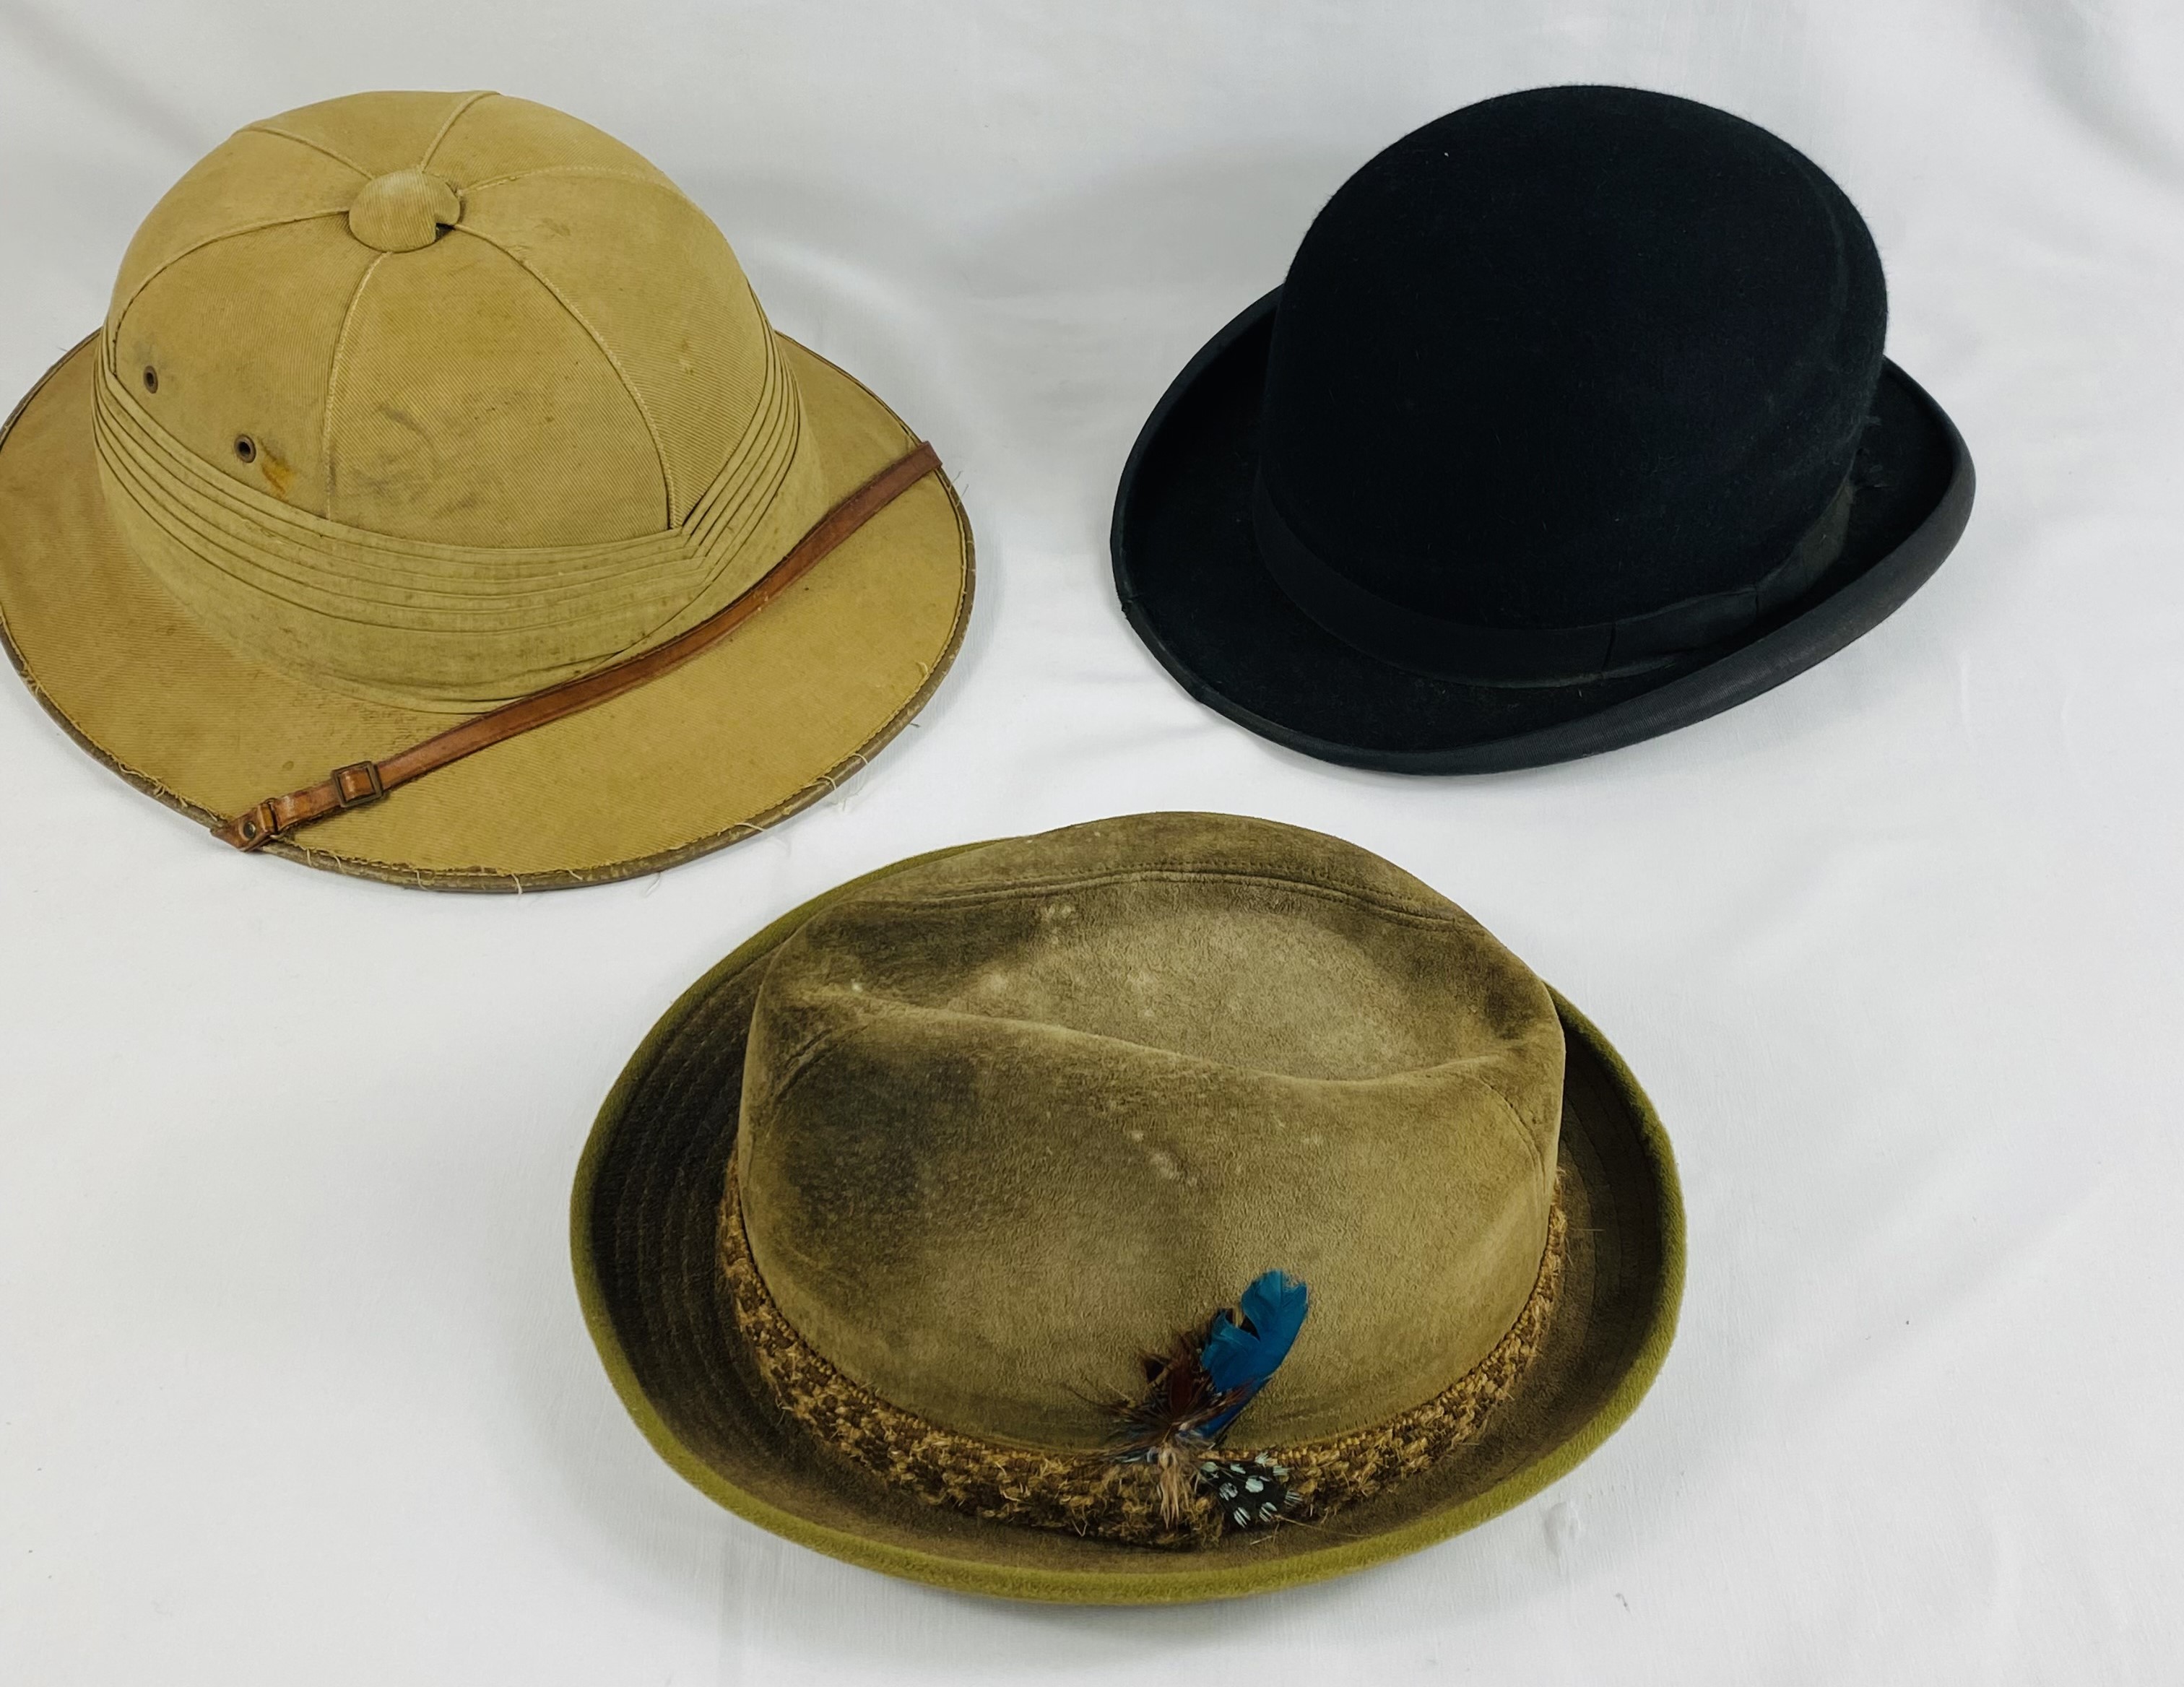 Hawkes pith helmet and two other hats